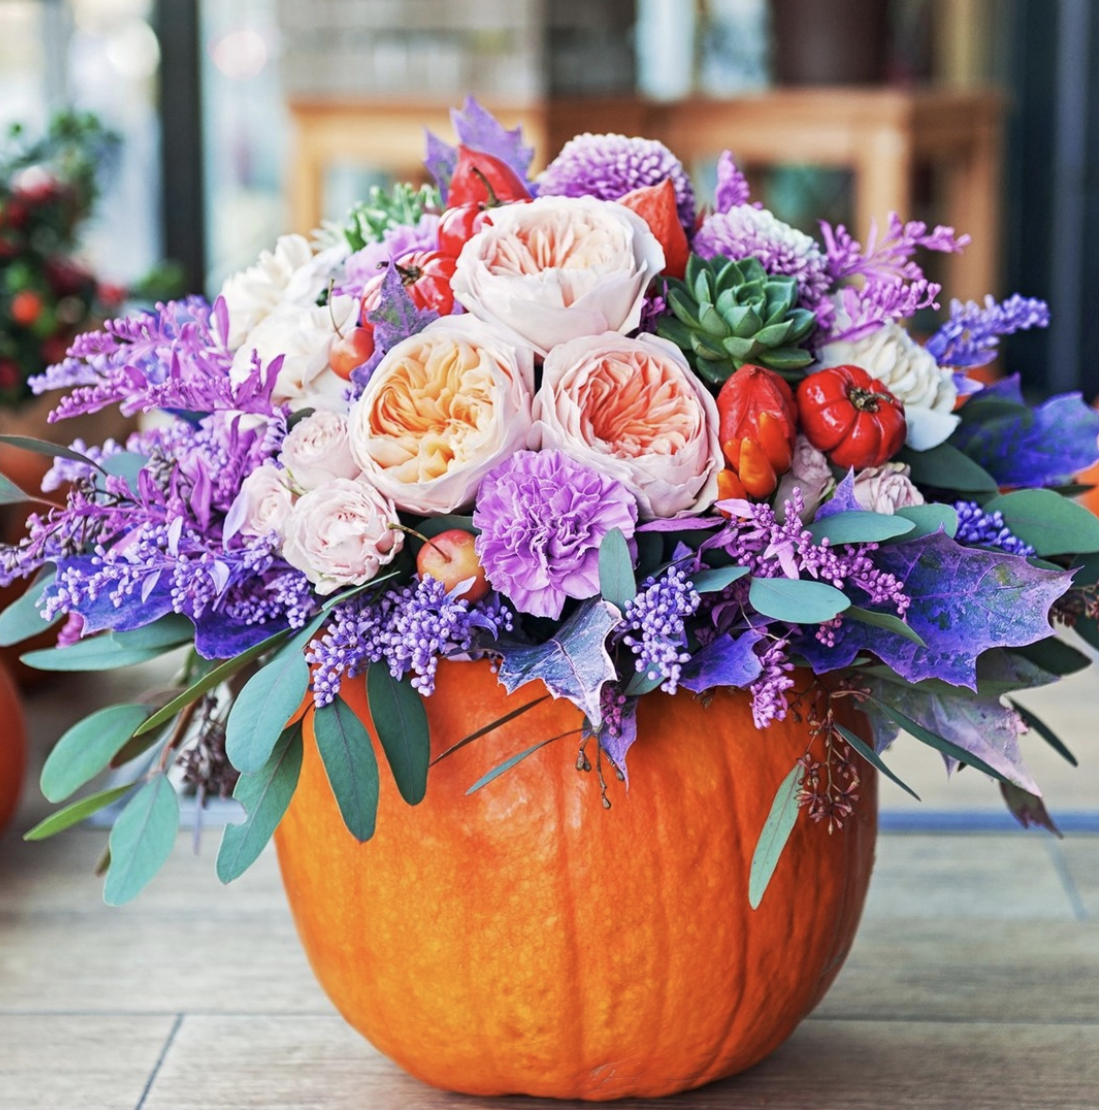 How To Create a DIY Pumpkin Planter To Add to Your Fall Decor - Home ...